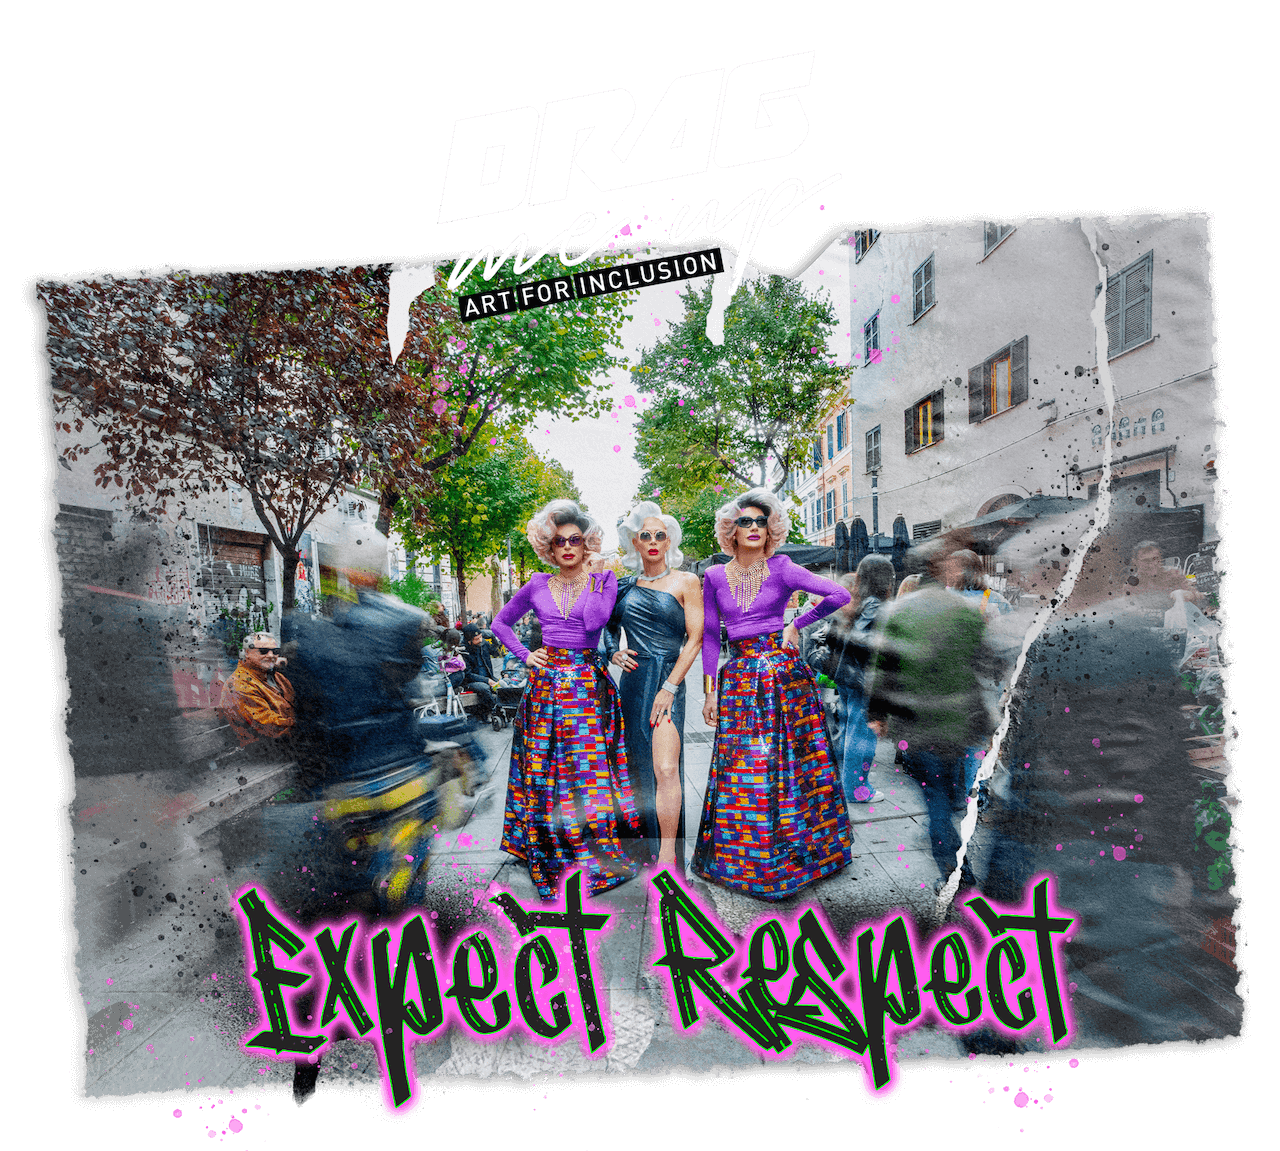 Drag Me Up, torna a Roma il festival drag, di performing art e arti queer - drag me up cover - Gay.it